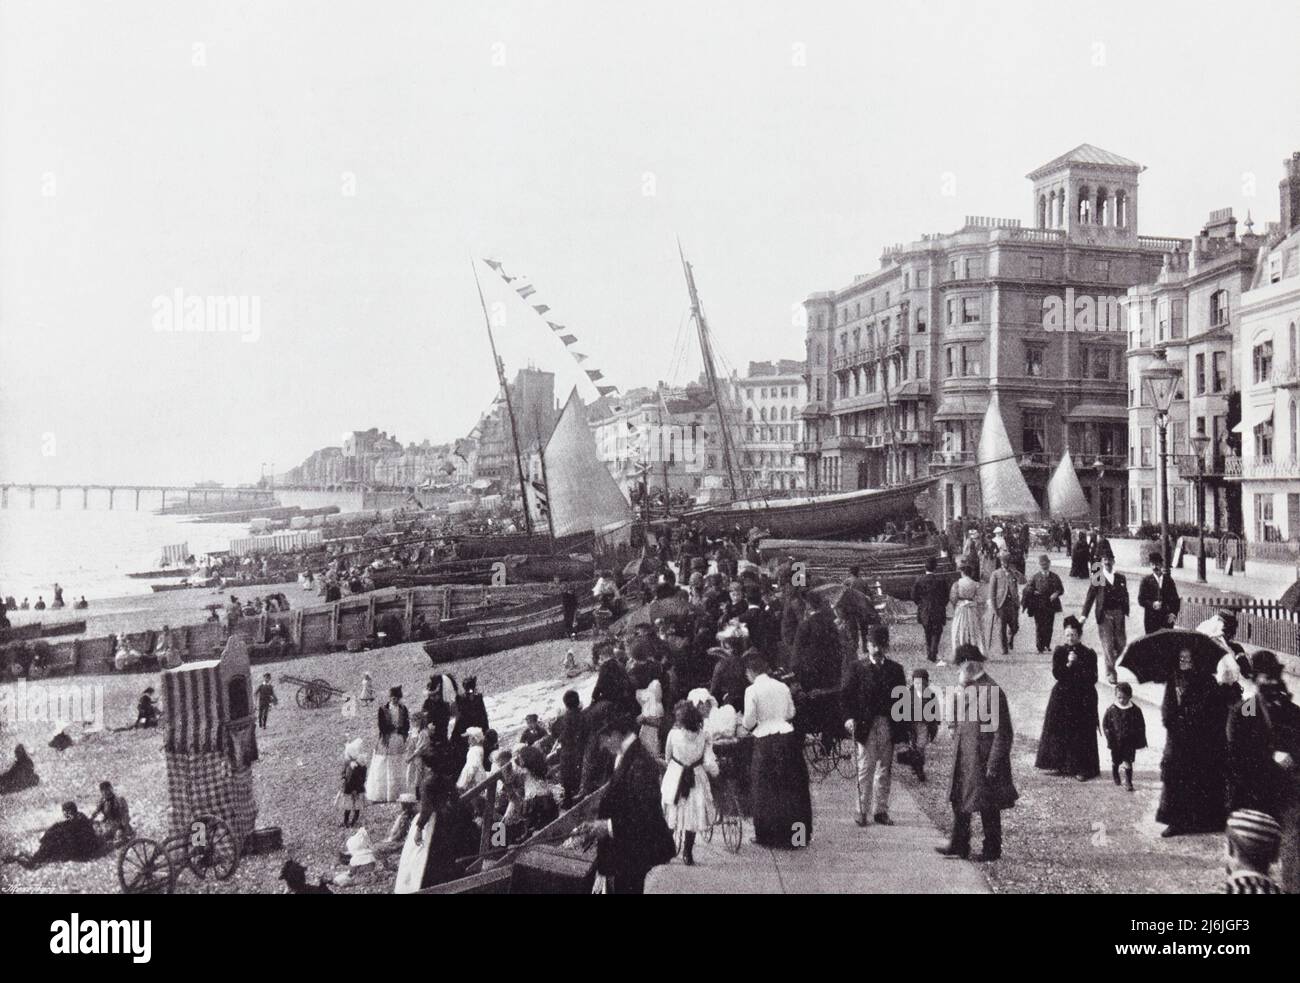 Hastings, East Sussex, England, showing the promenade and the pier in the 19th century.  From Around The Coast,  An Album of Pictures from Photographs of the Chief Seaside Places of Interest in Great Britain and Ireland published London, 1895, by George Newnes Limited. Stock Photo